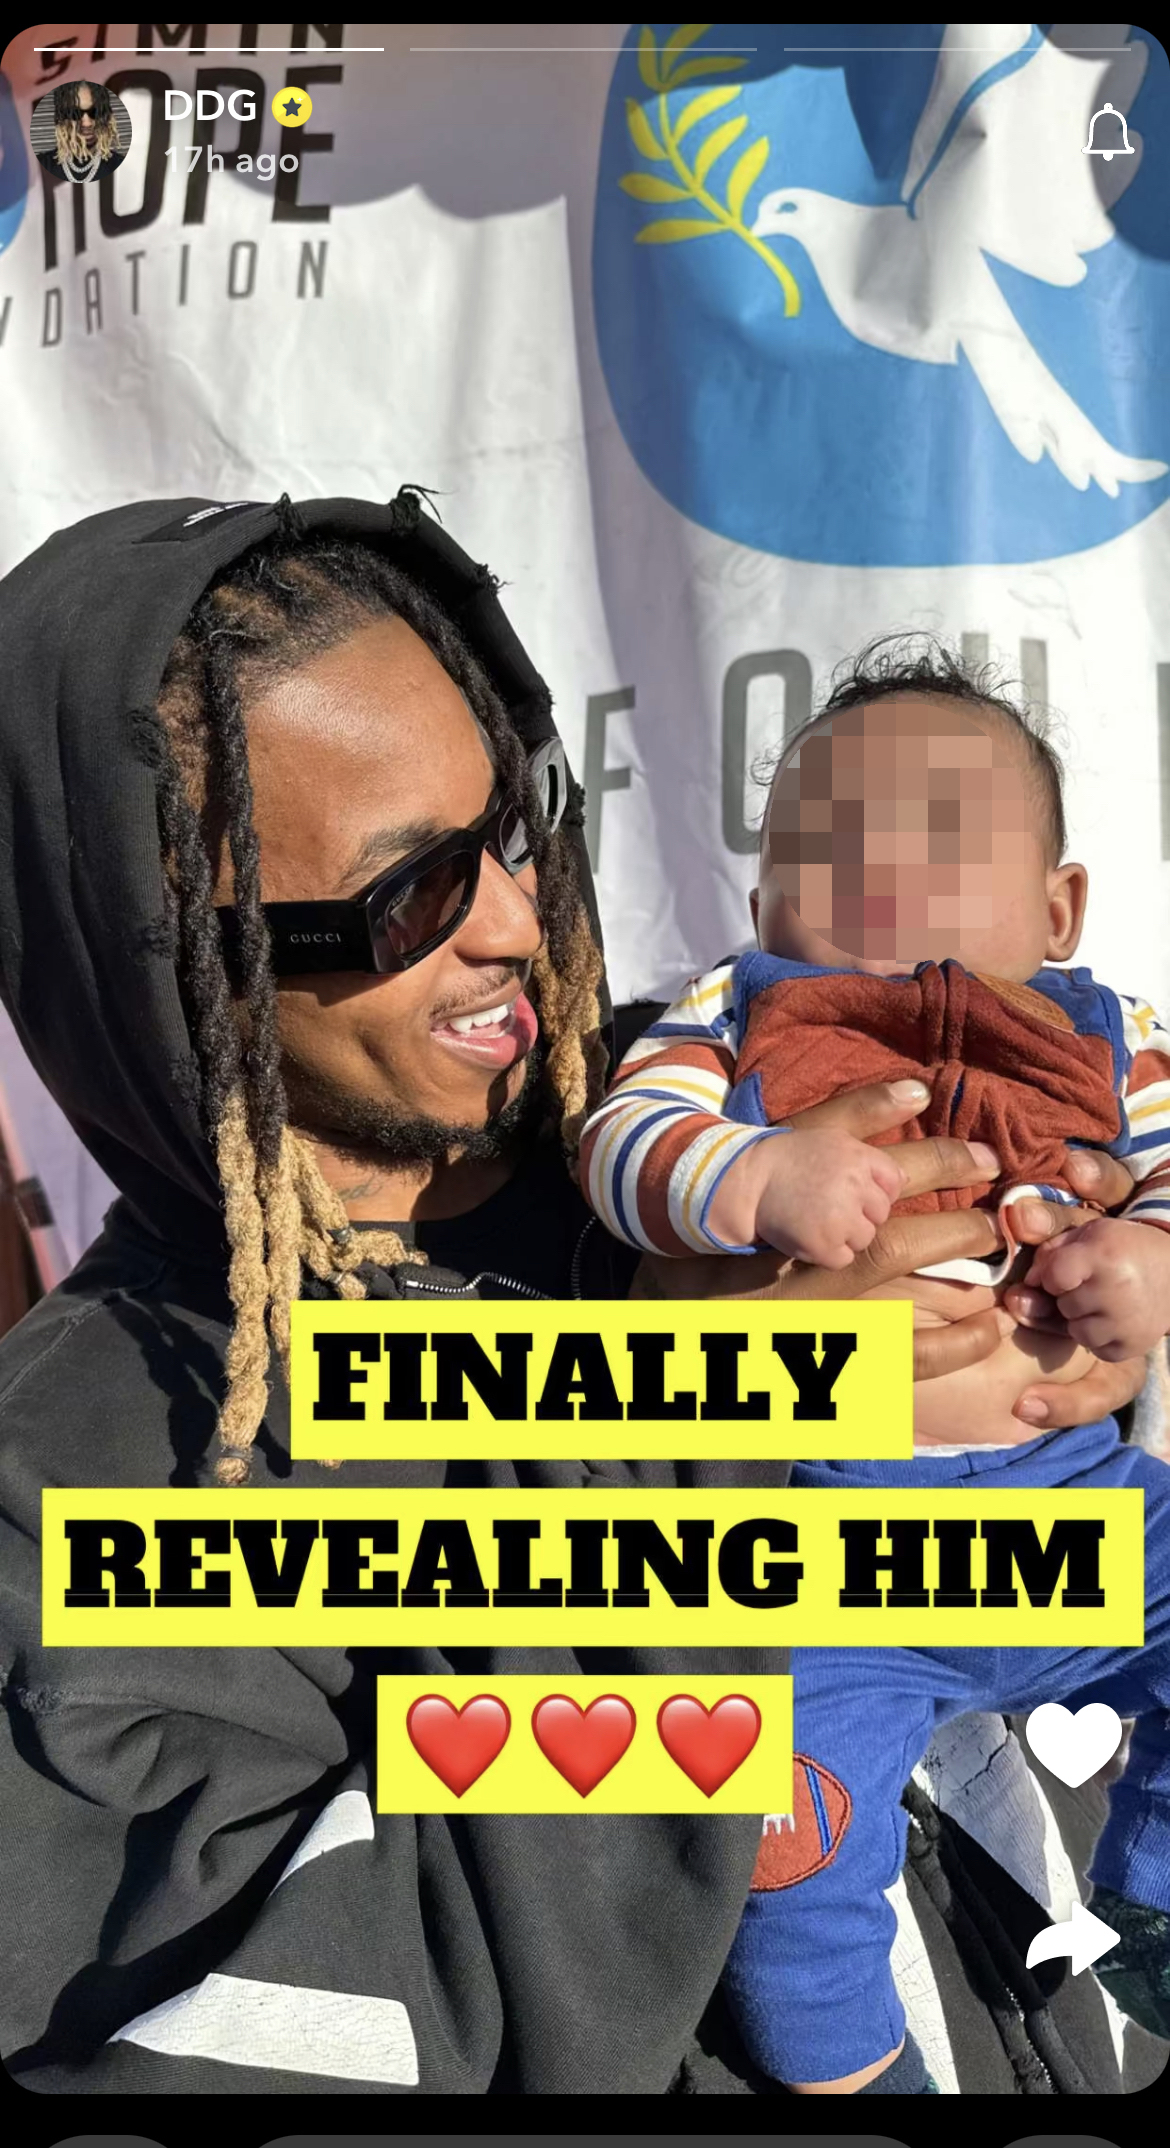 Halo's father, DGG — birth name Darryl Dwayne Granberry Jr. — further fueled rumors when he shared a pic of him holding a baby on Snapchat